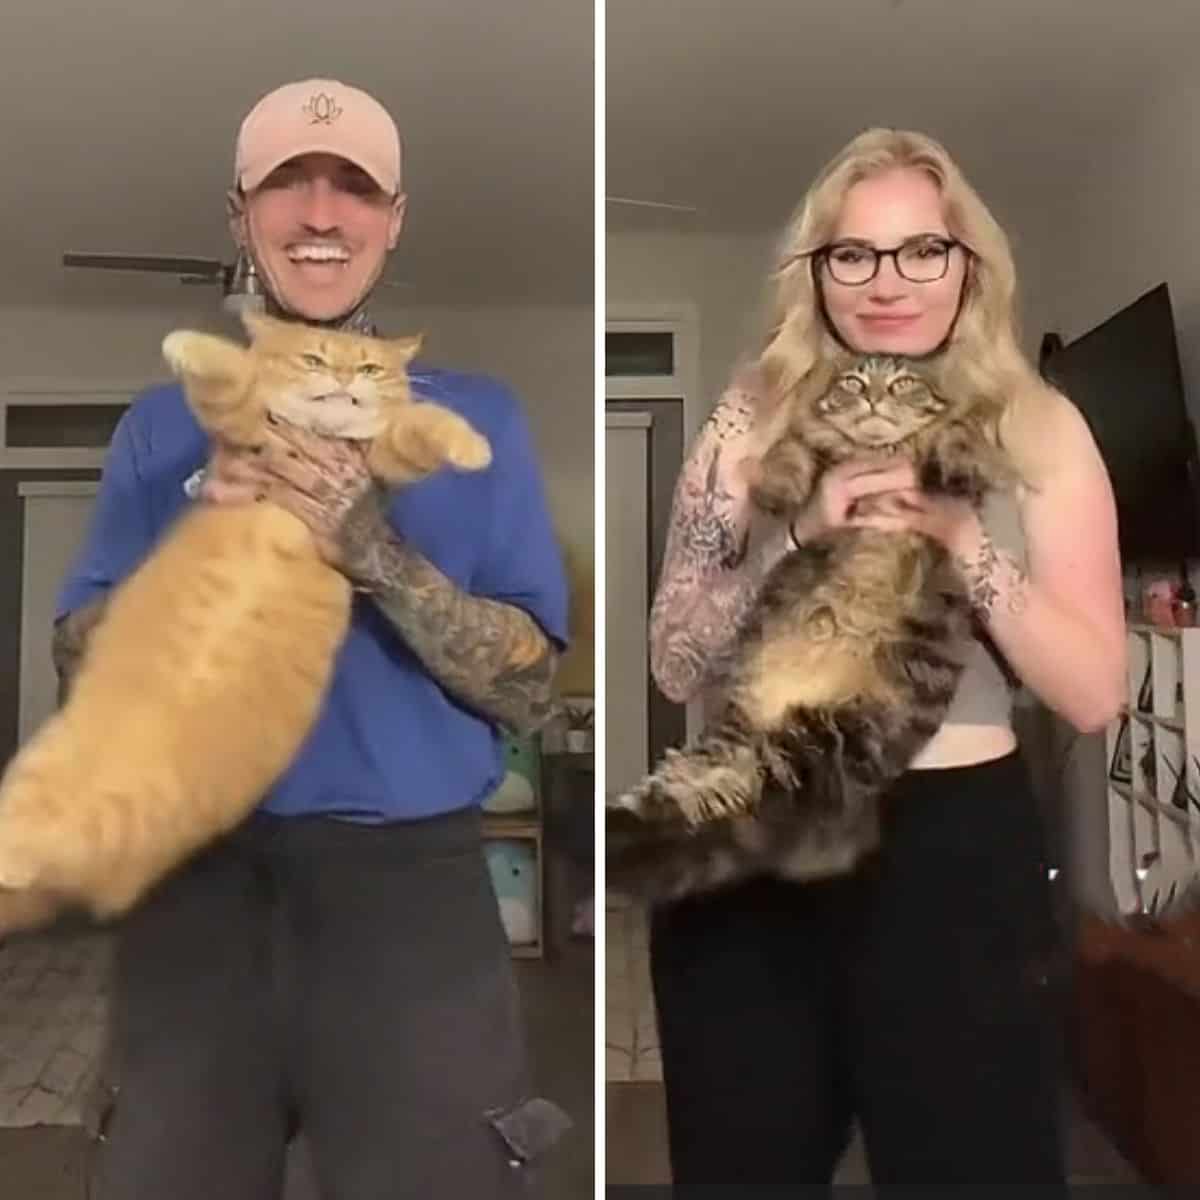 photos of man and woman each holding a cat